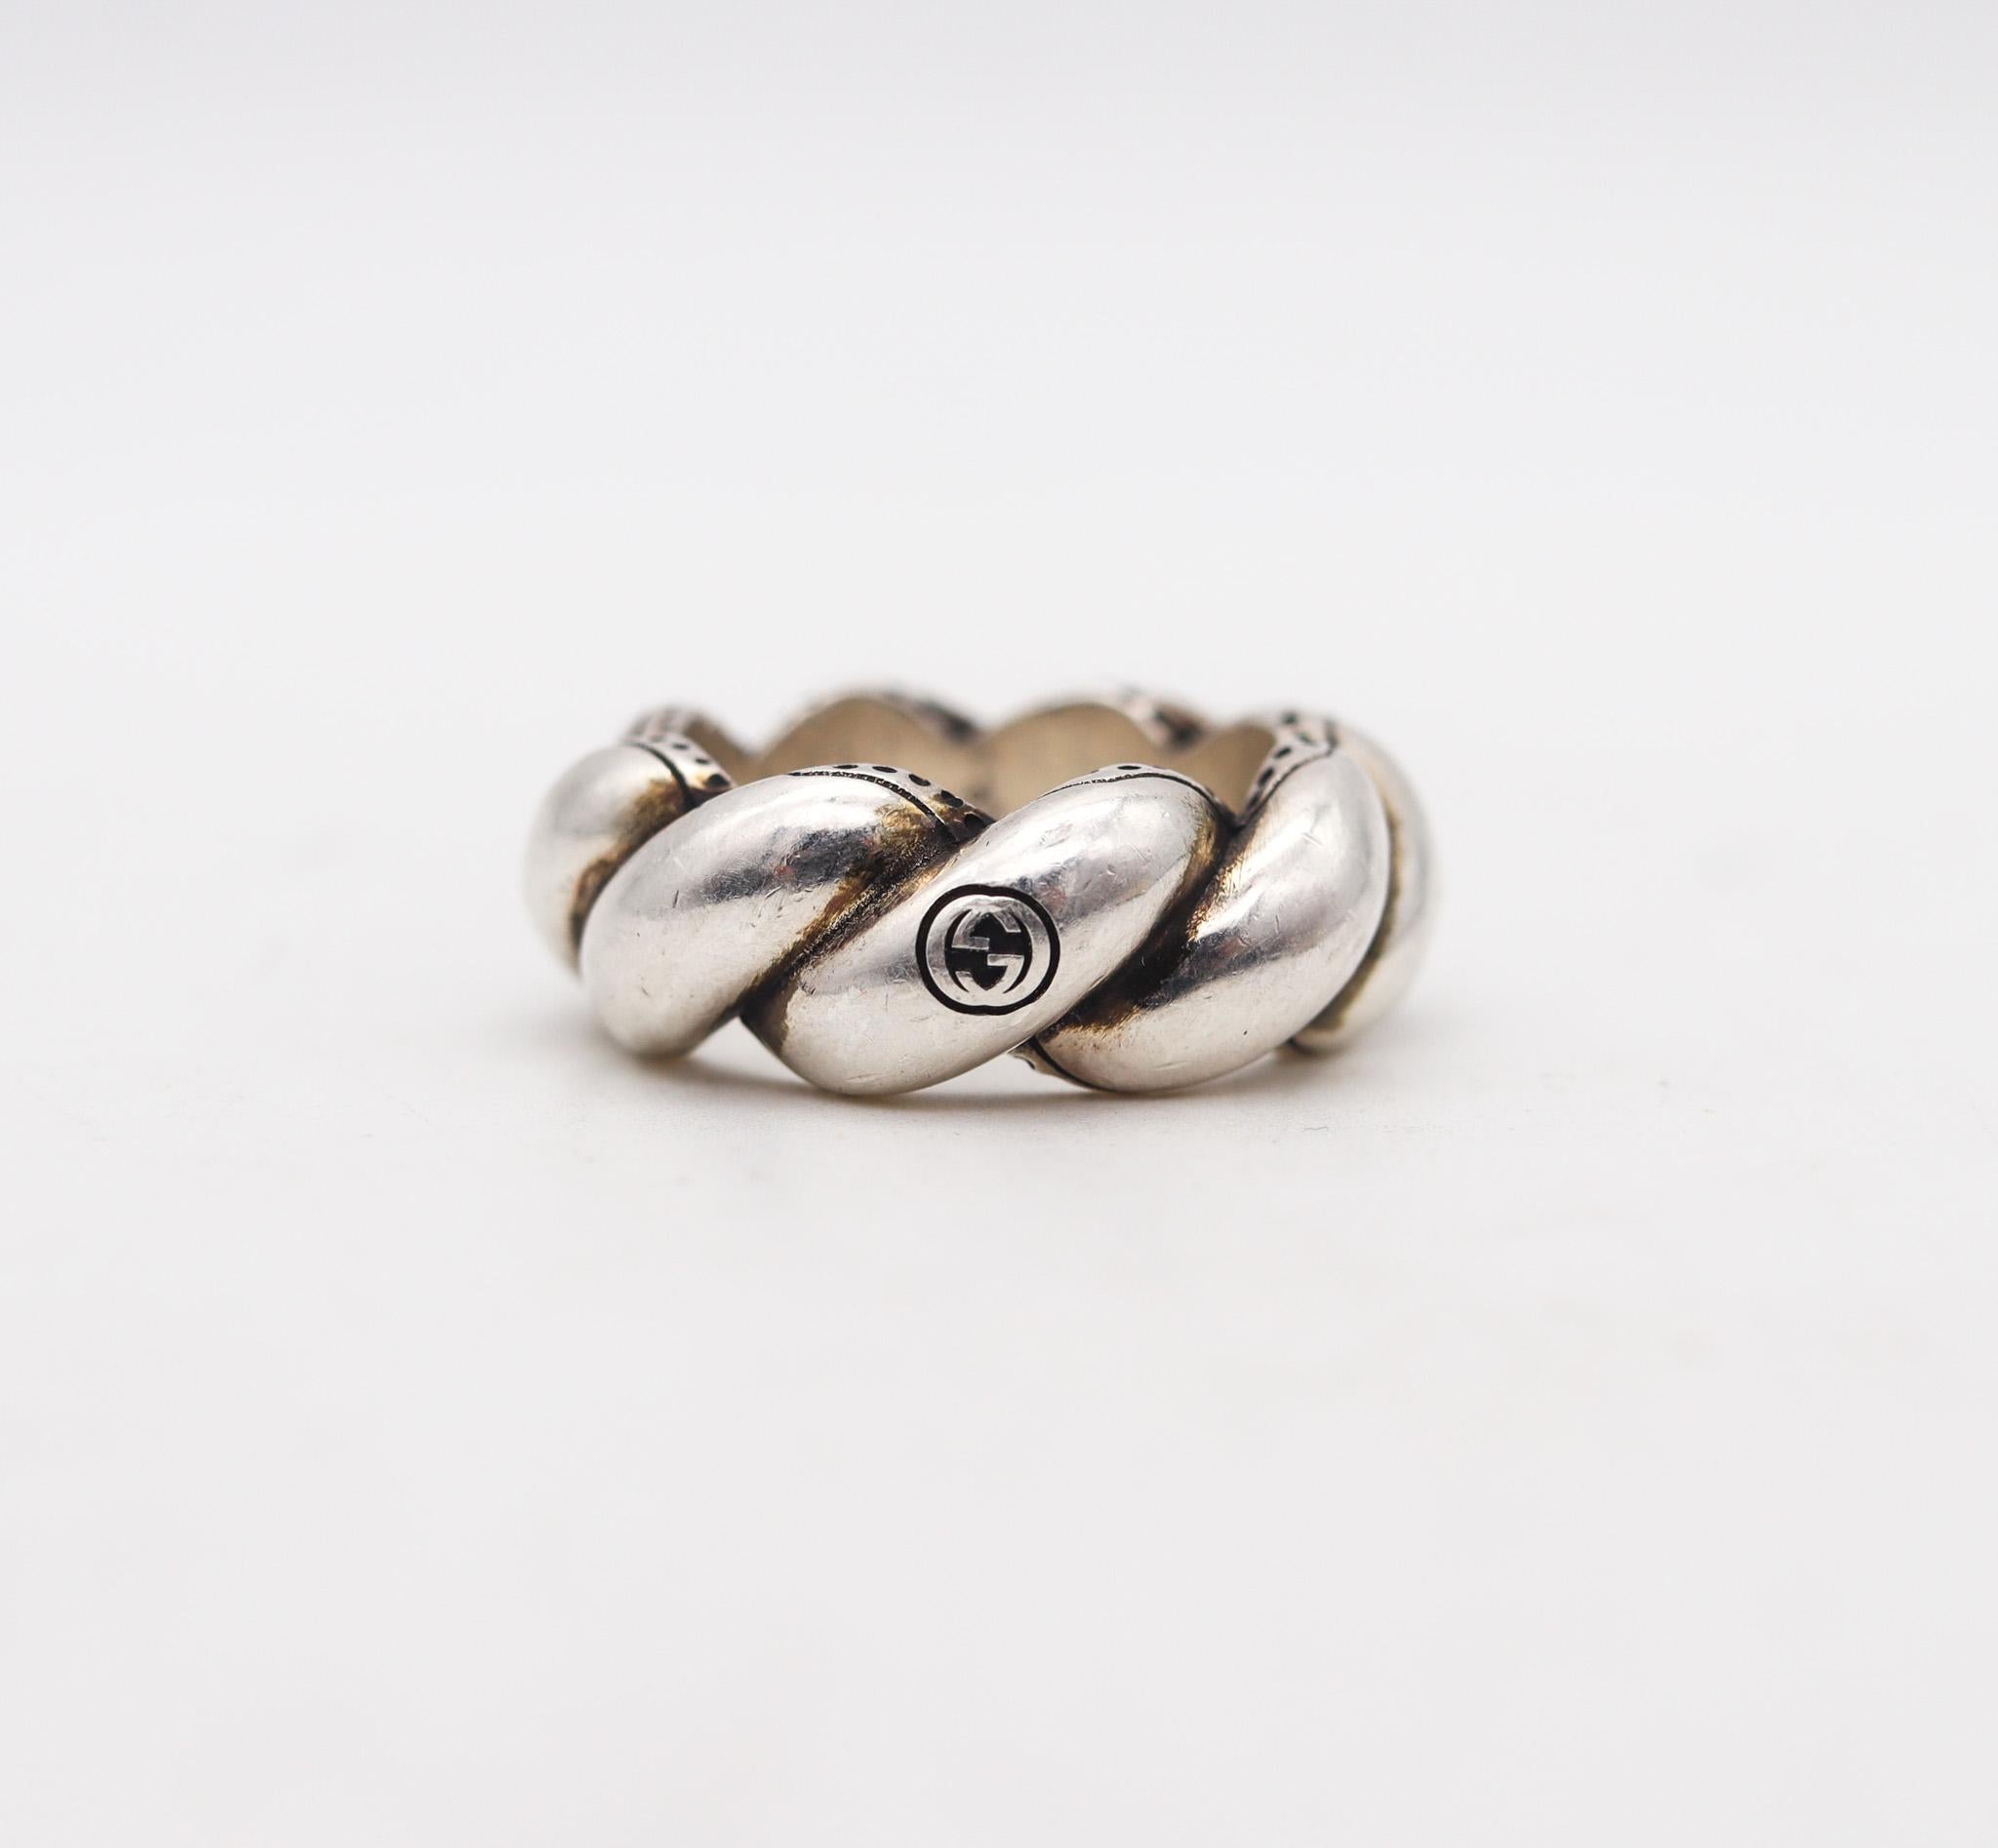 Twisted ring designed by Gucci.

Beautiful vintage ring, created in Milano Italy by the luxury house of Gucci. This ring is has been crafted in the shape of a San Marcos twisted band in solid .925/.999 sterling silver with high polished finish. This